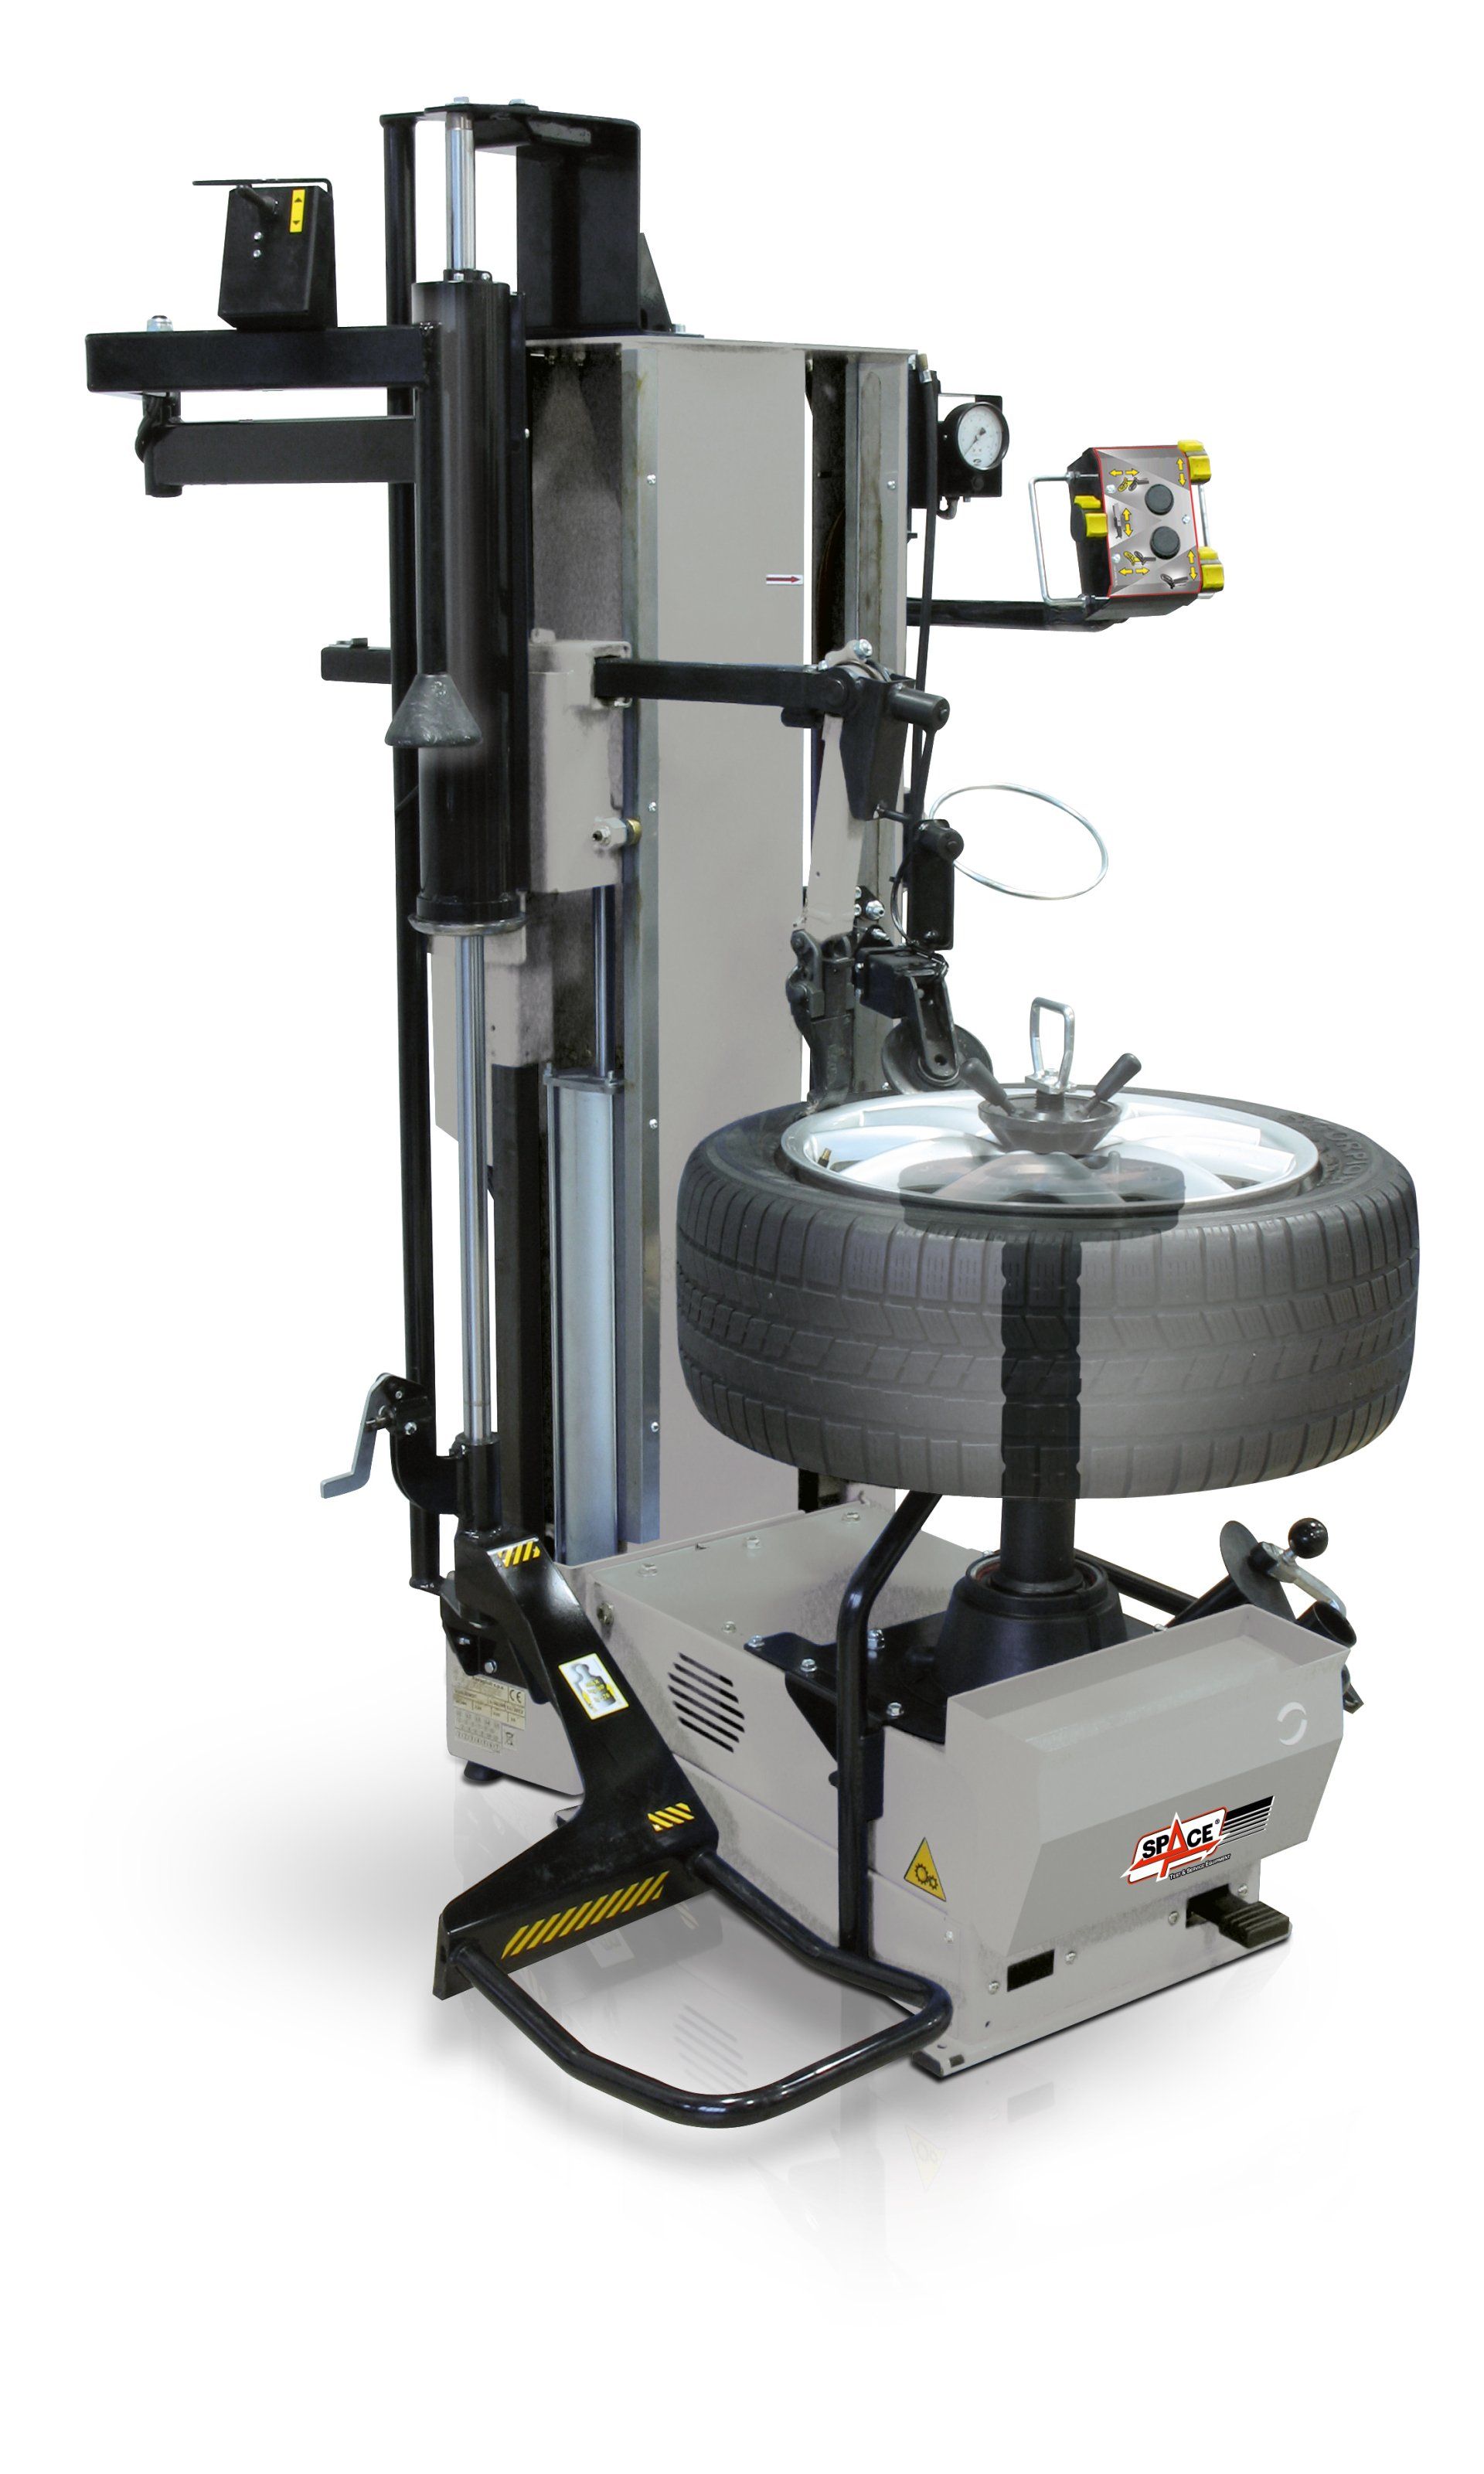 SPACE AUTOMATIC TYRE CHANGER MACHINE